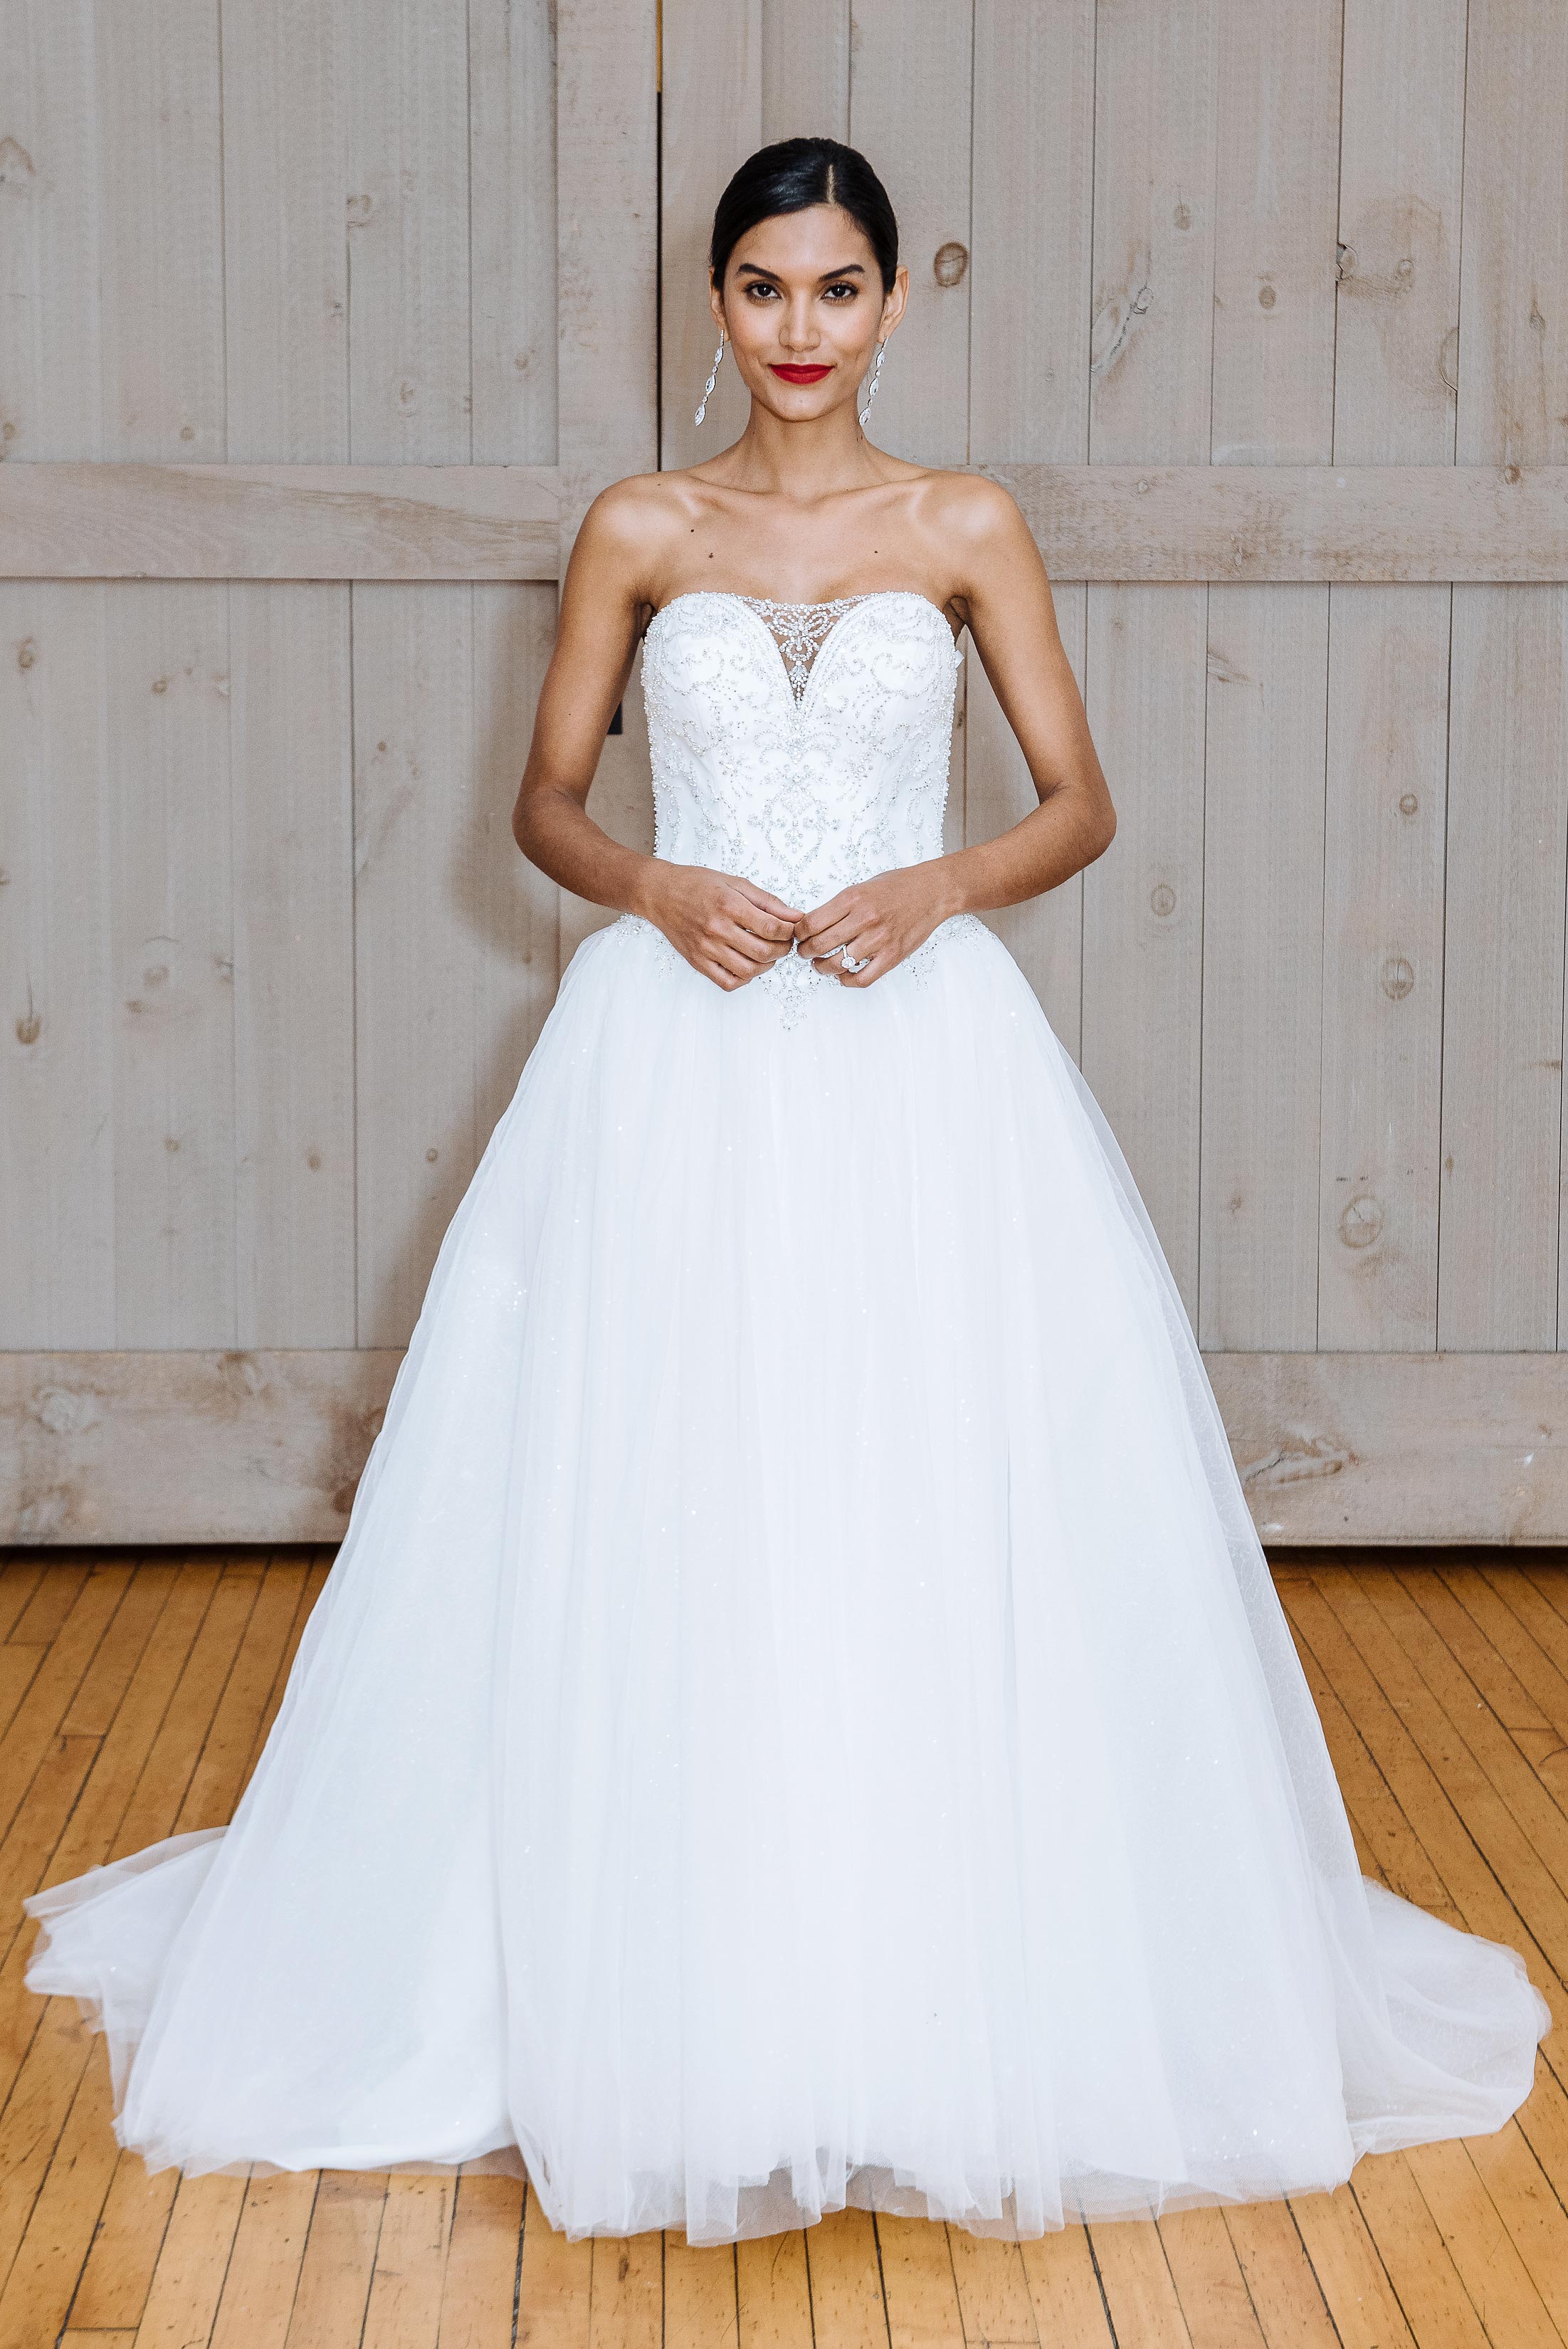 Great David Bridal Wedding Dresses of the decade The ultimate guide 